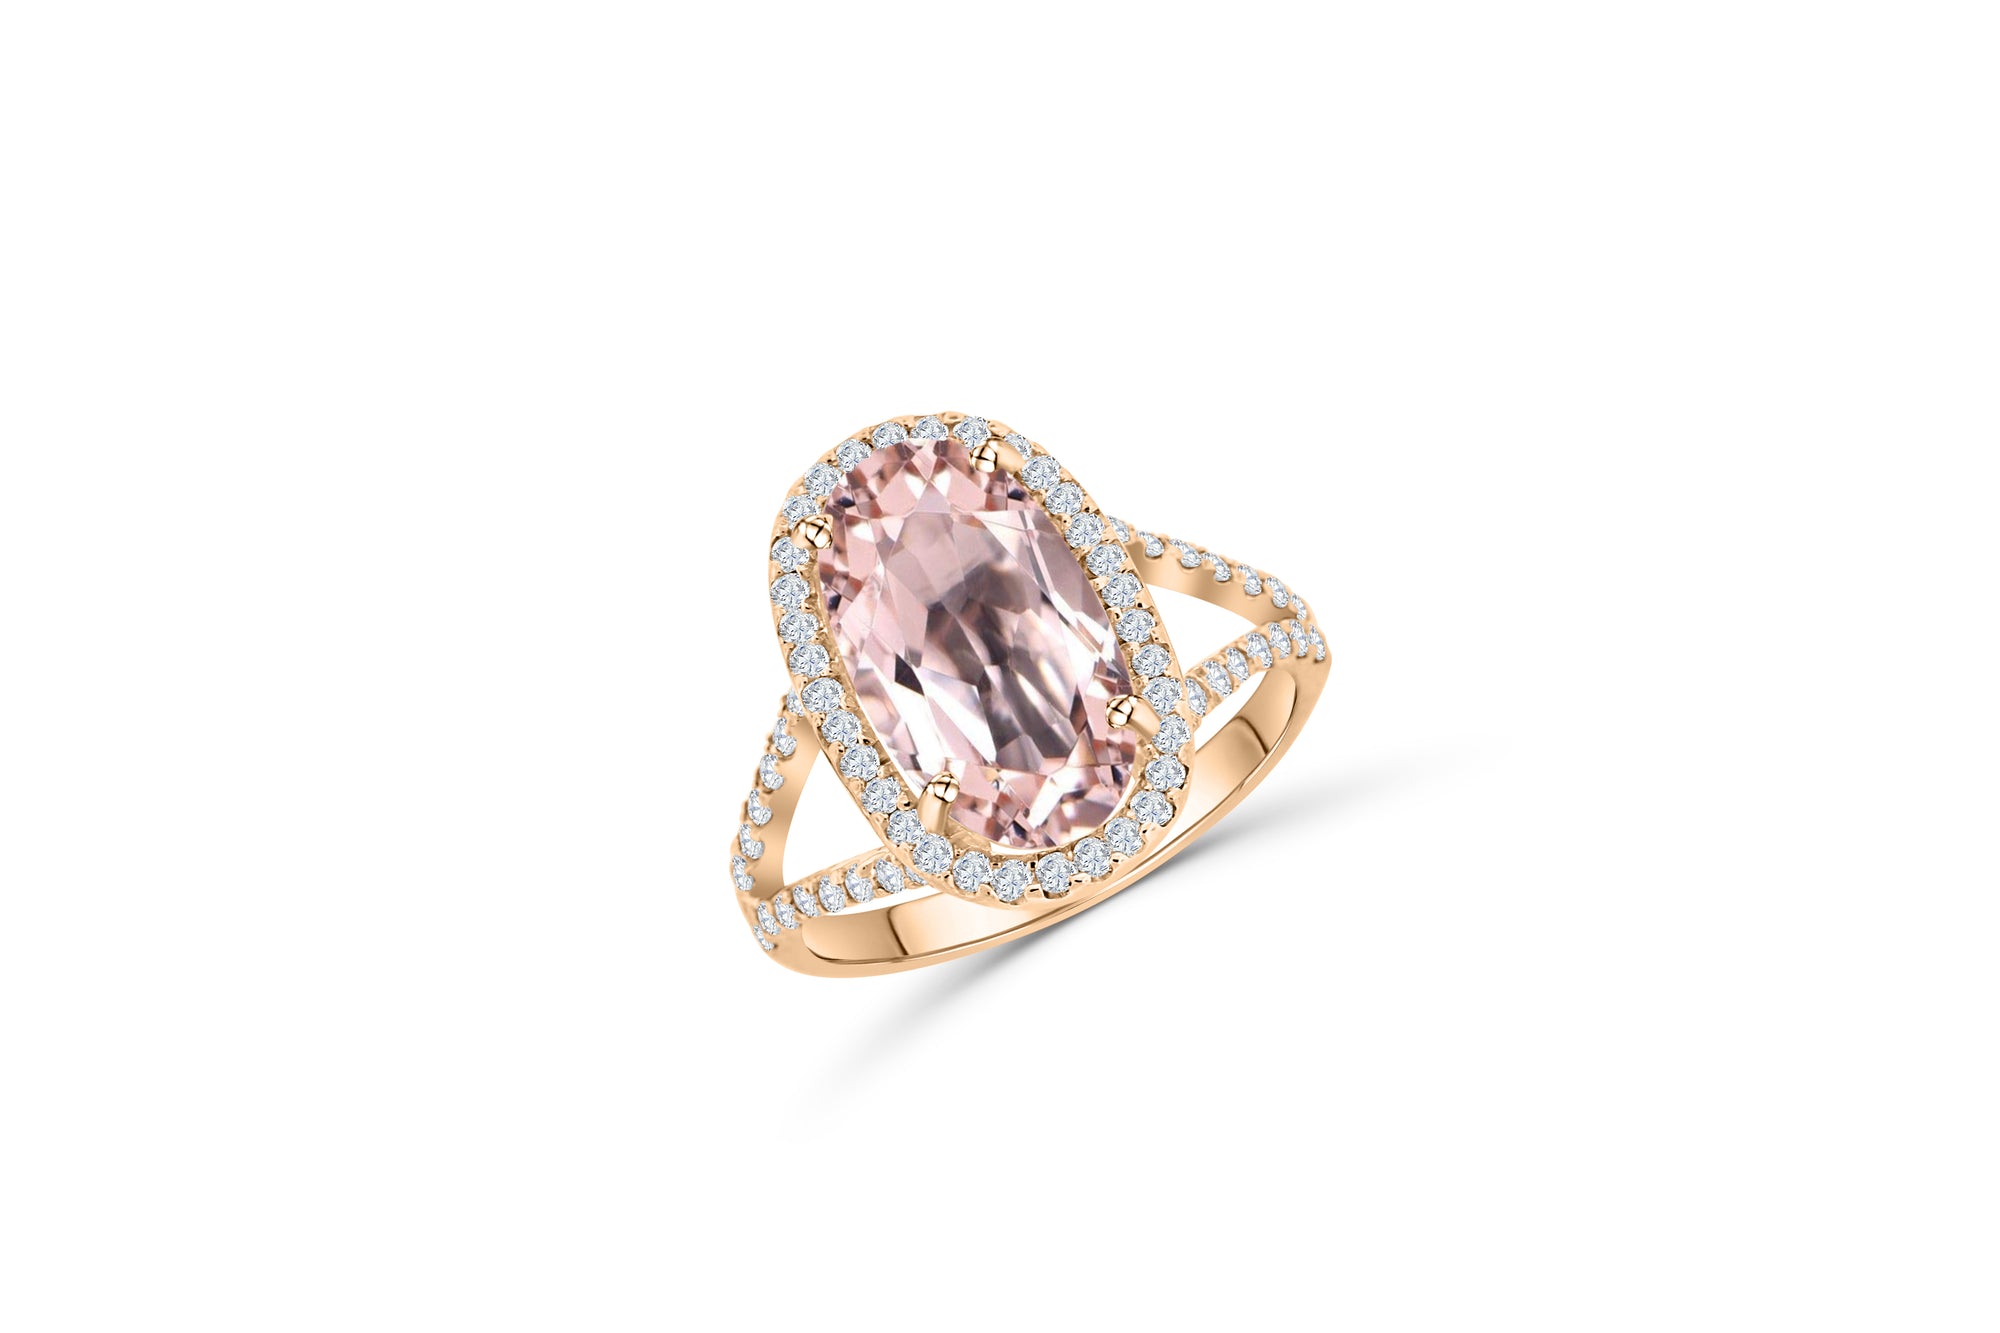 4.19 CT Oval Morganite Diamond Ring 0.68 CT TW Diamonds 14K Rose Gold MGR002 - NorthandSouthJewelry